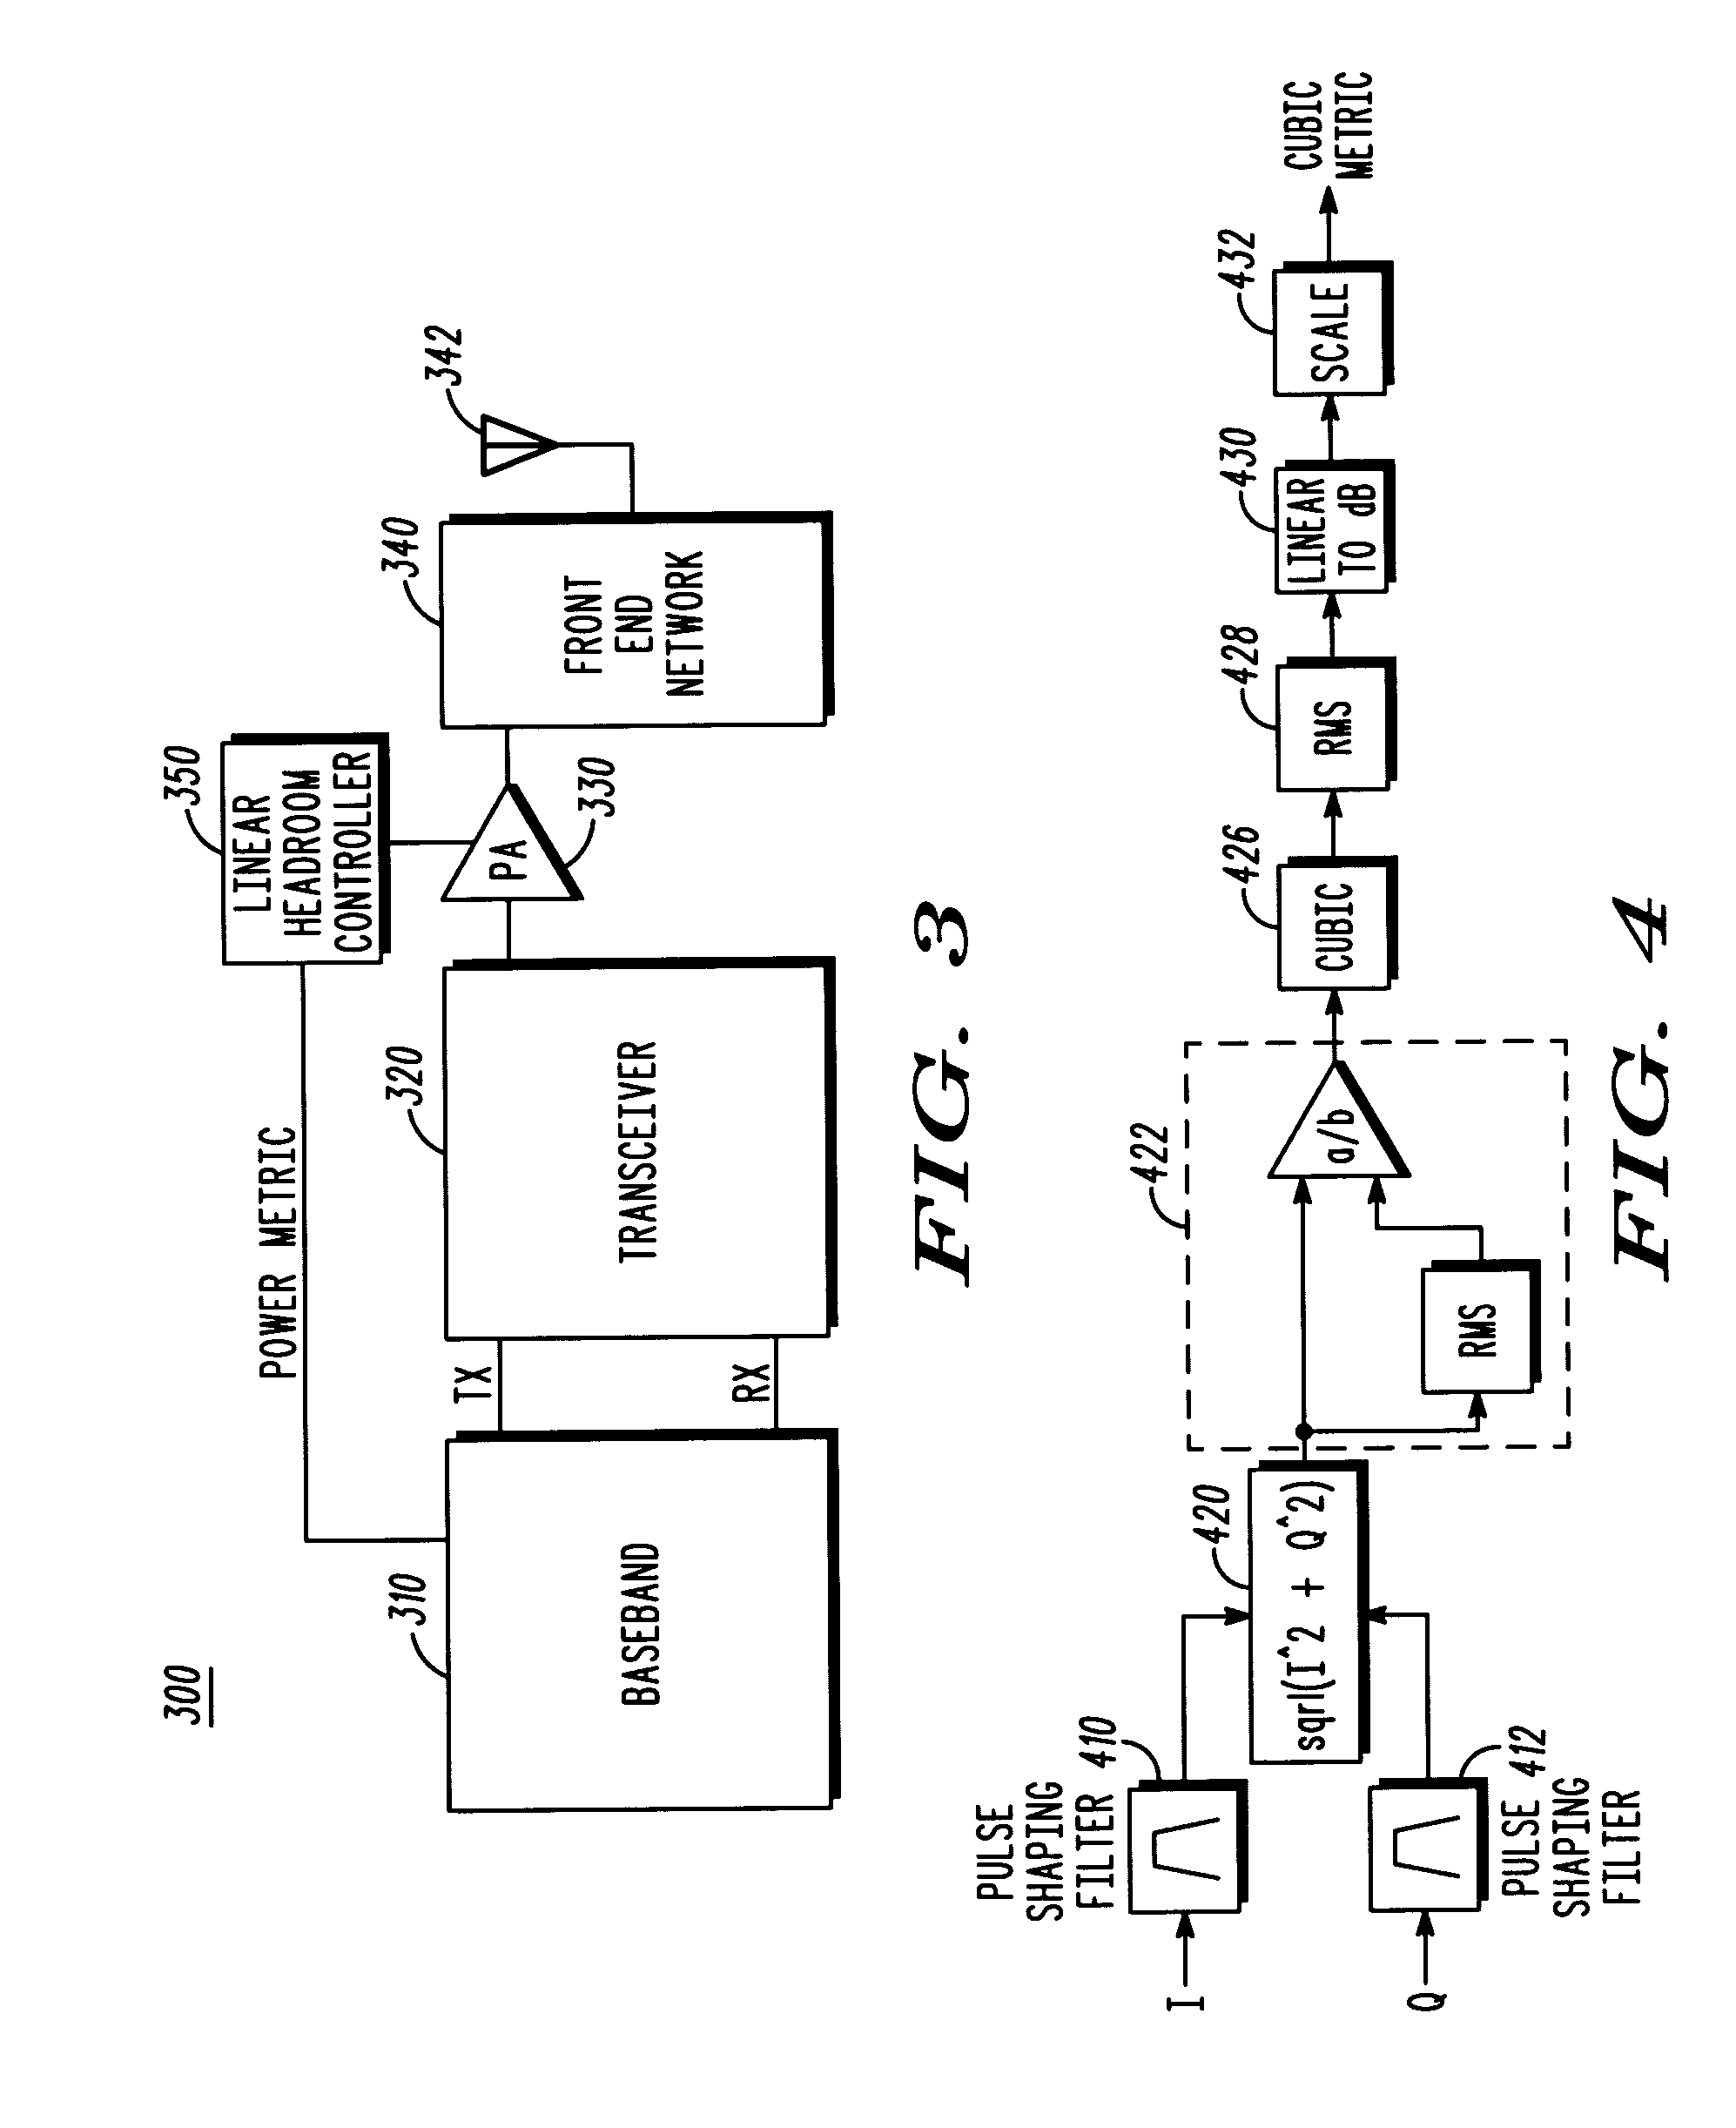 Signal configuration based transmitter adjustment in wireless communication devices